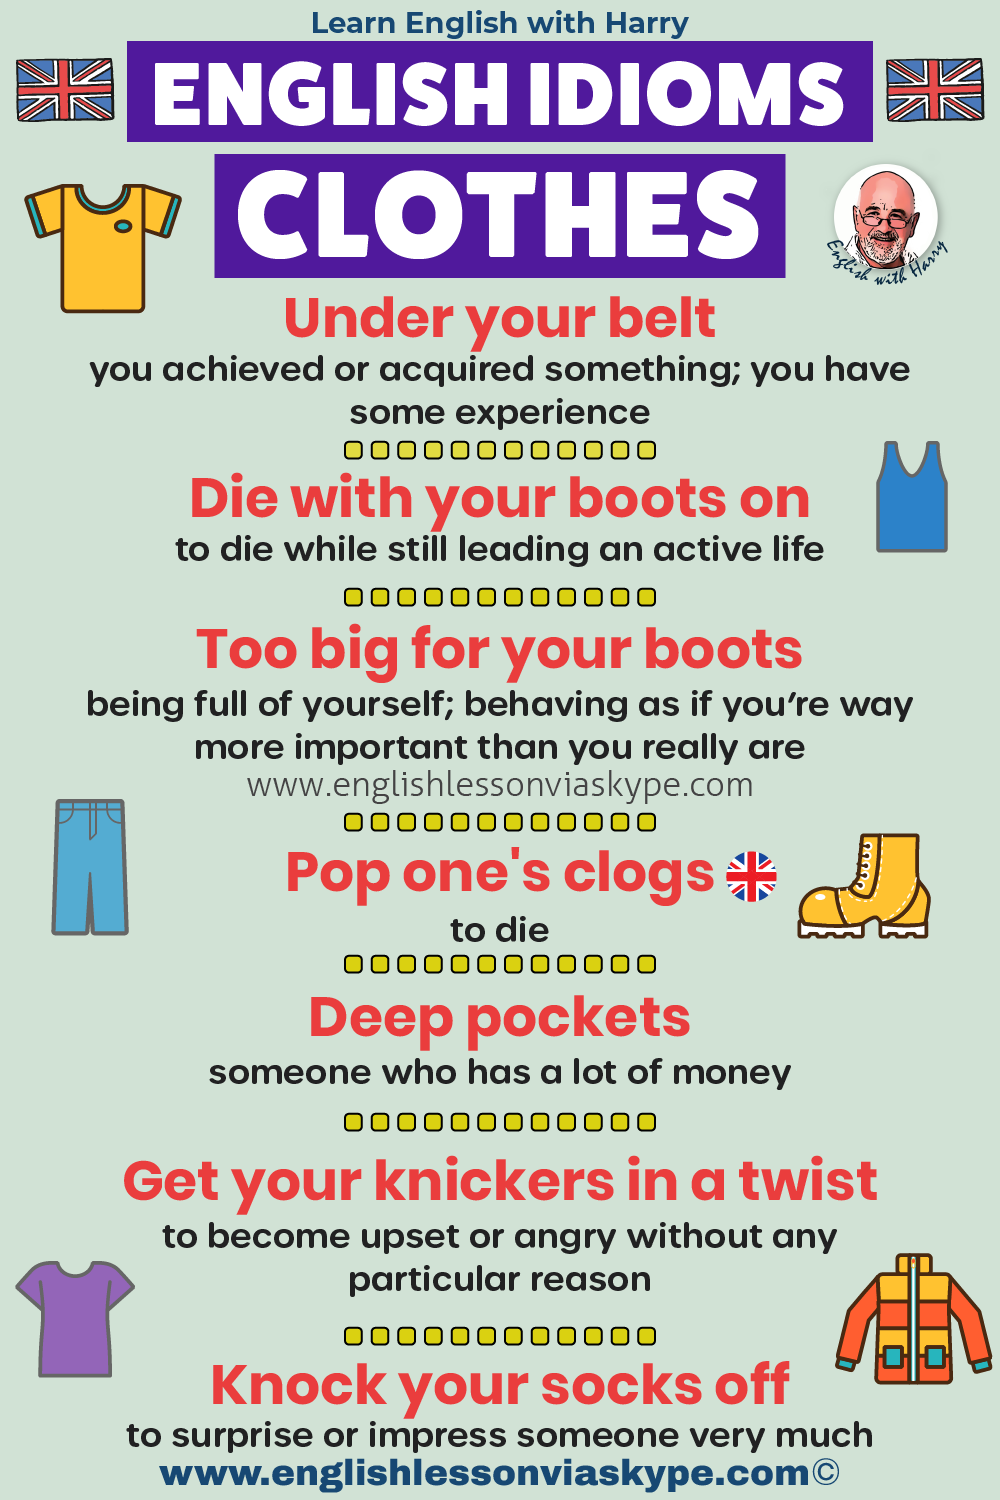 Idioms with clothes